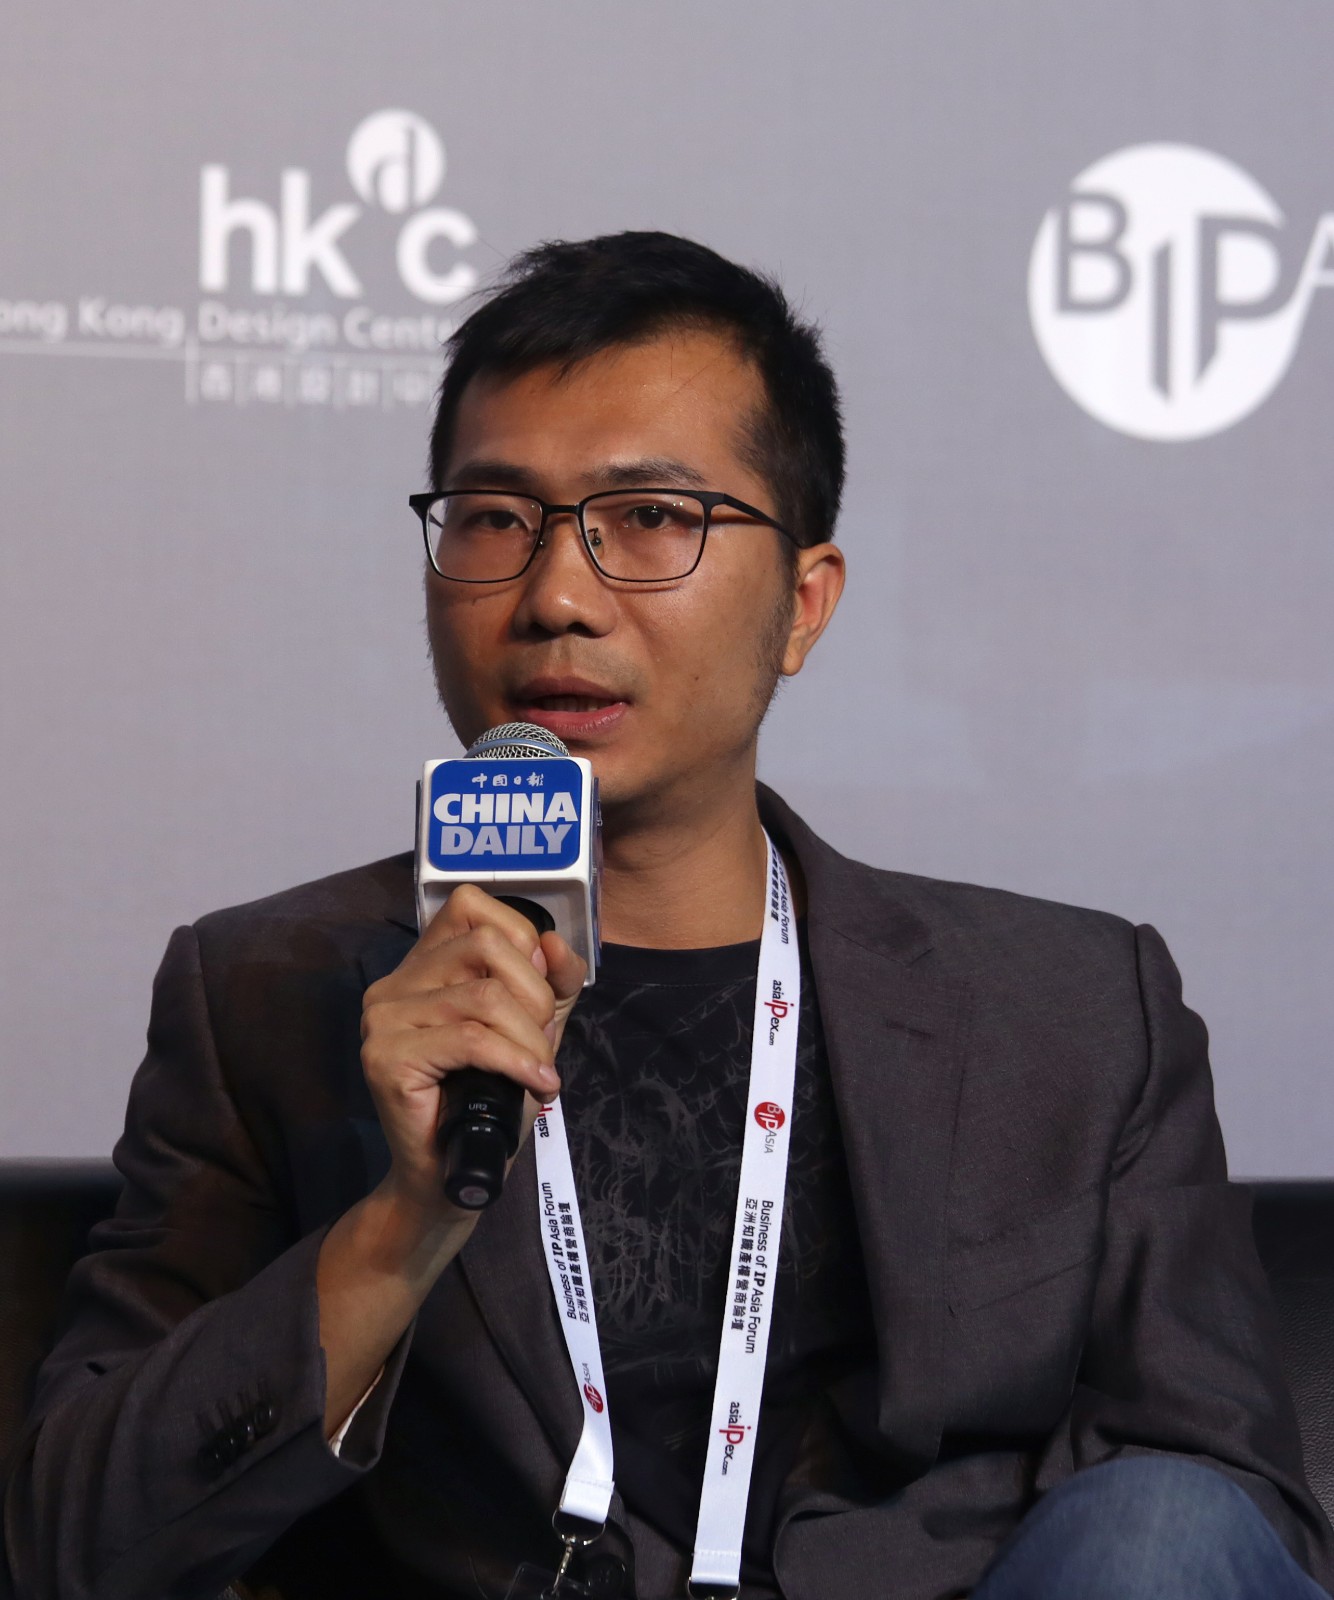 Entertainment expert: IP industry needs more patience and people